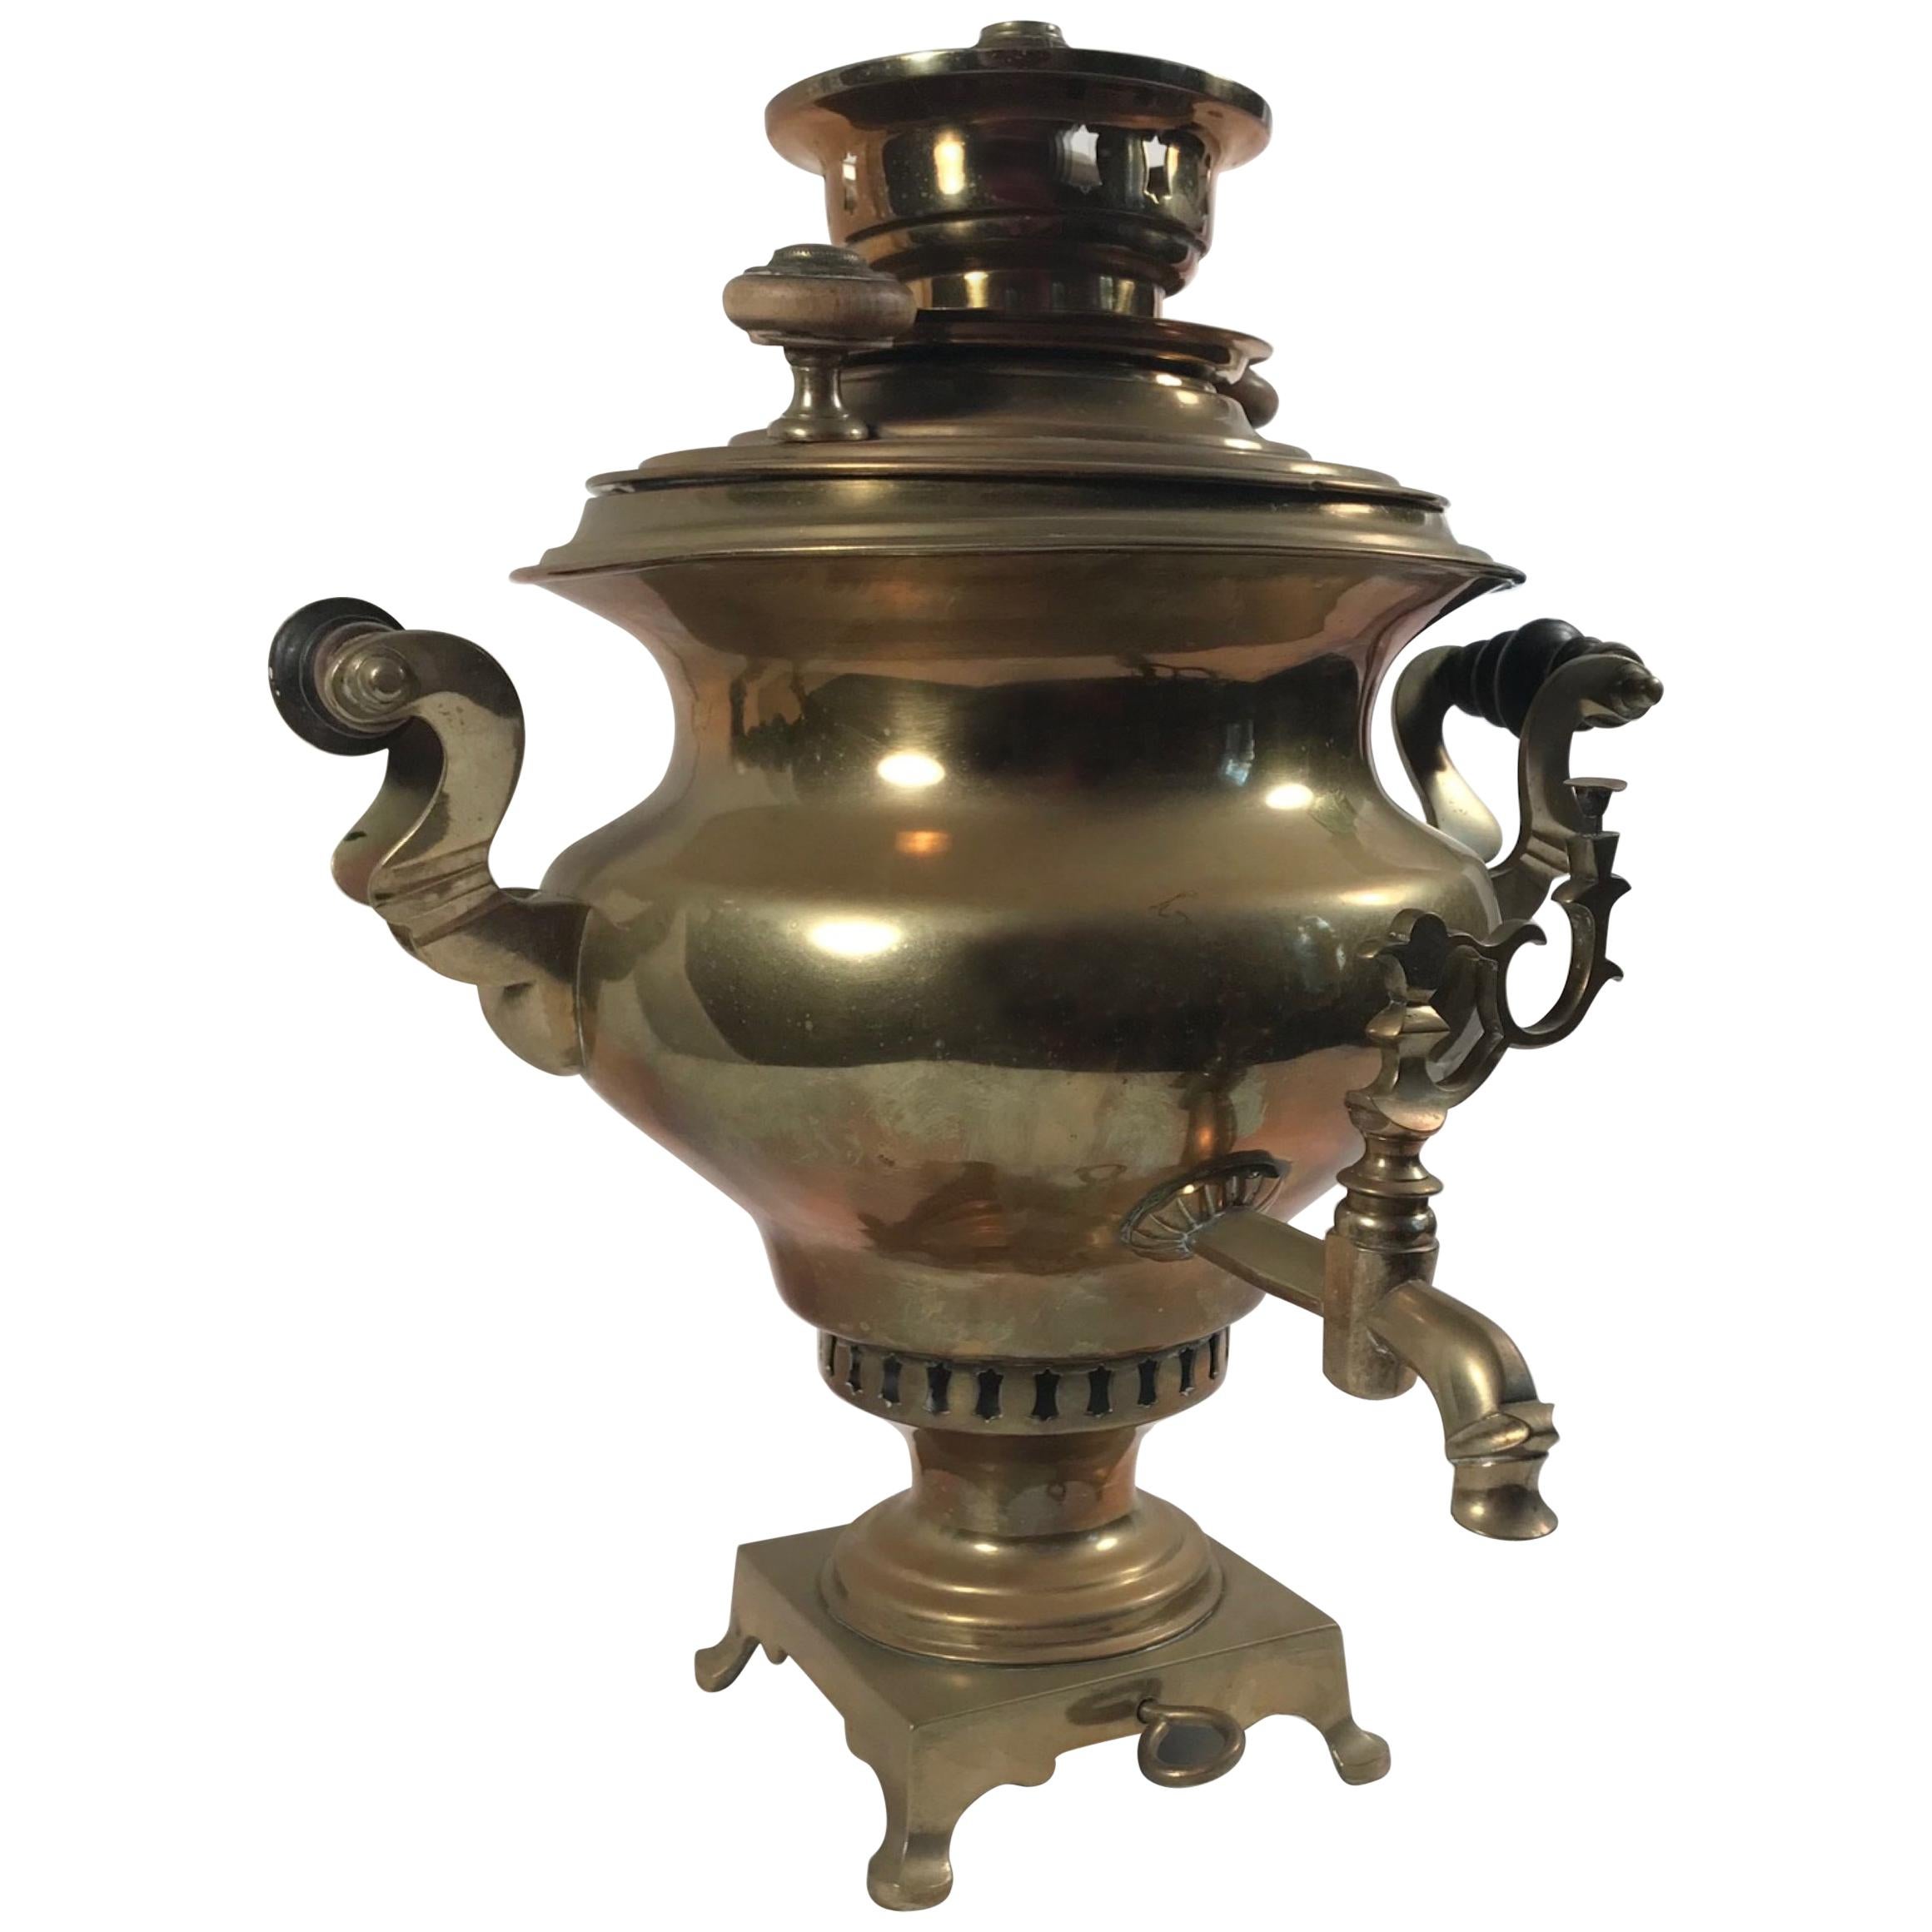 Decorative Imperial Russian Samovar, Late 19th Century at 1stDibs